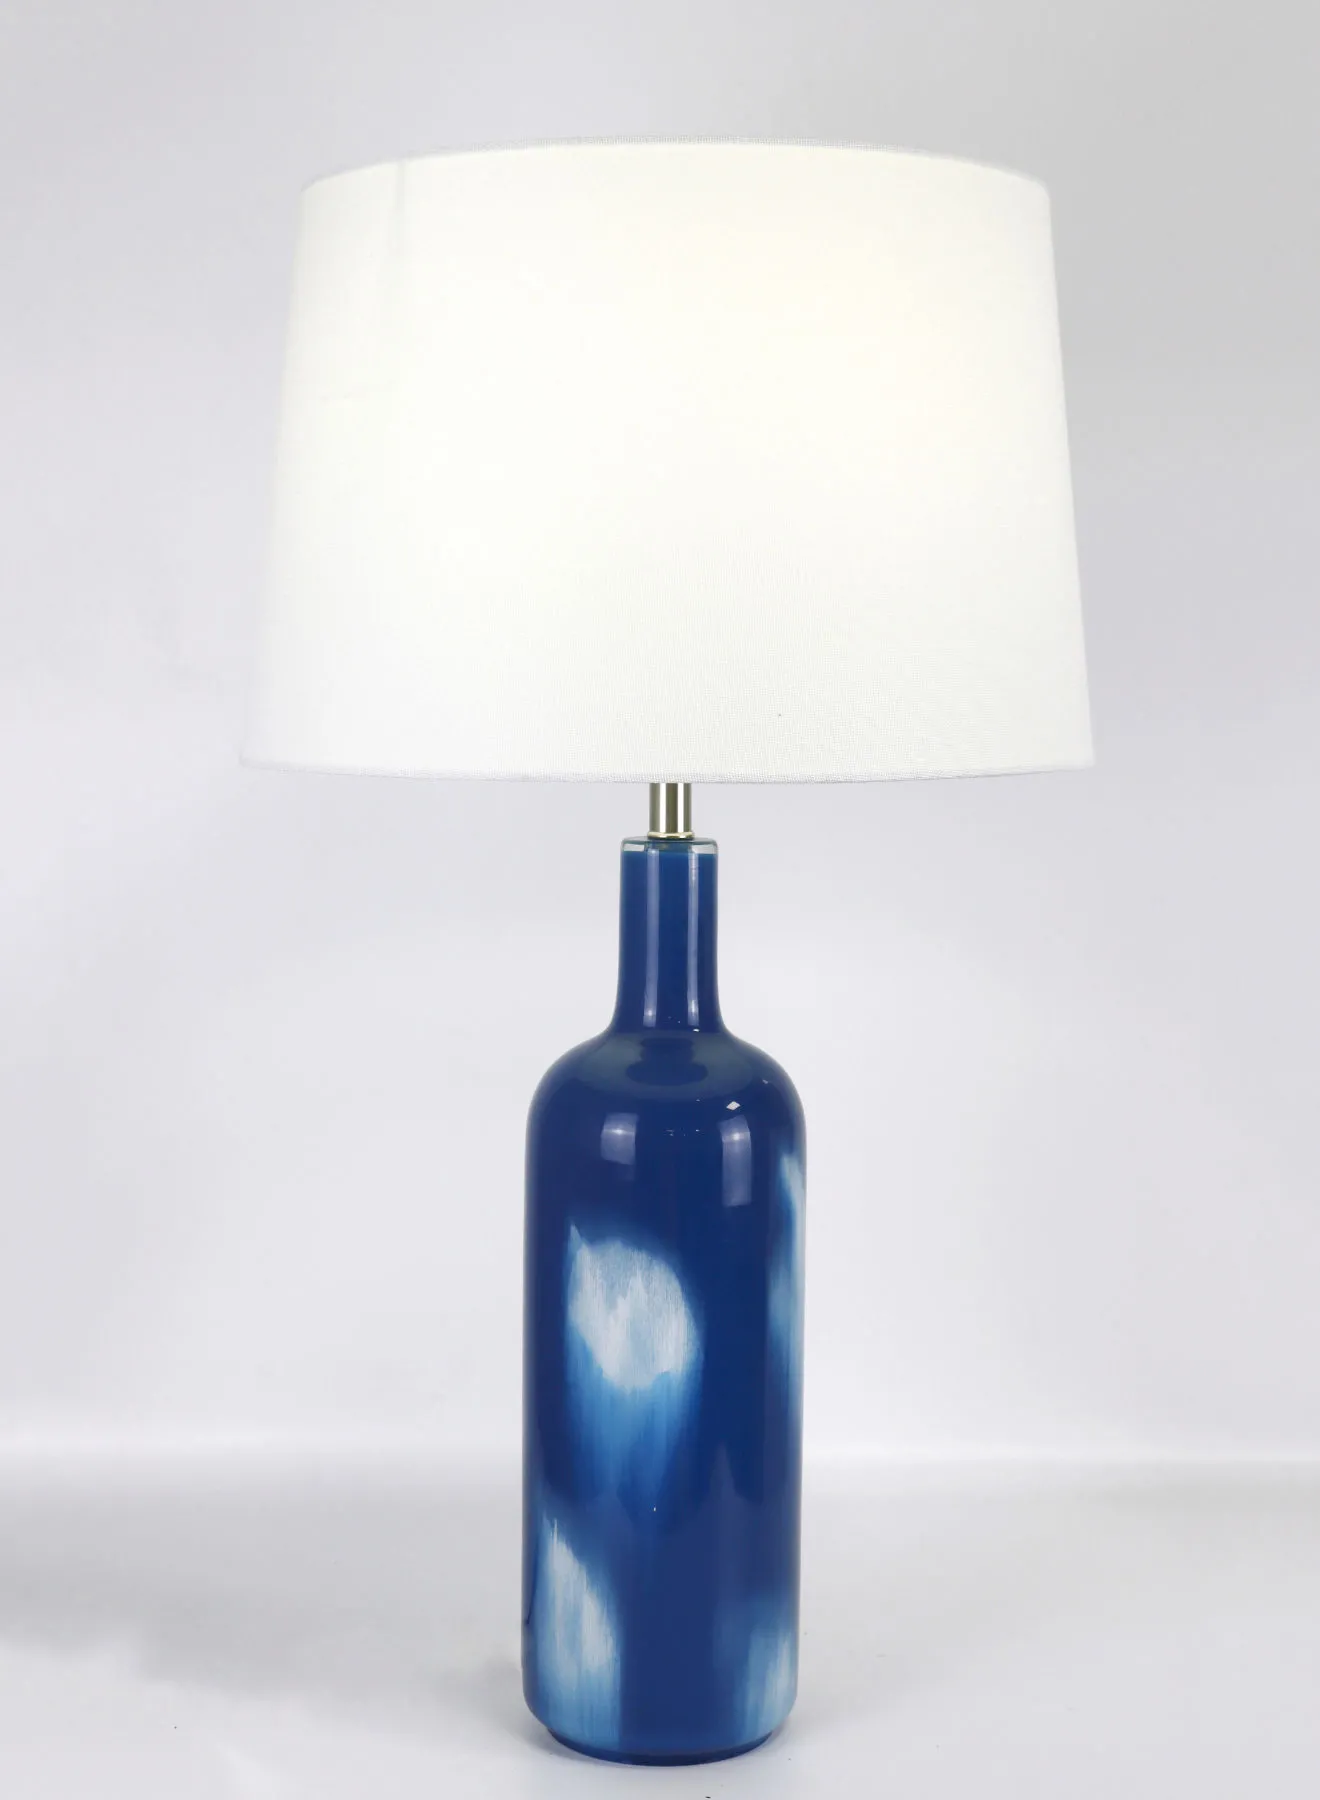 ebb & flow Modern Design Glass Table Lamp Unique Luxury Quality Material for the Perfect Stylish Home RSN71028 Blue/White 15 x 27.2